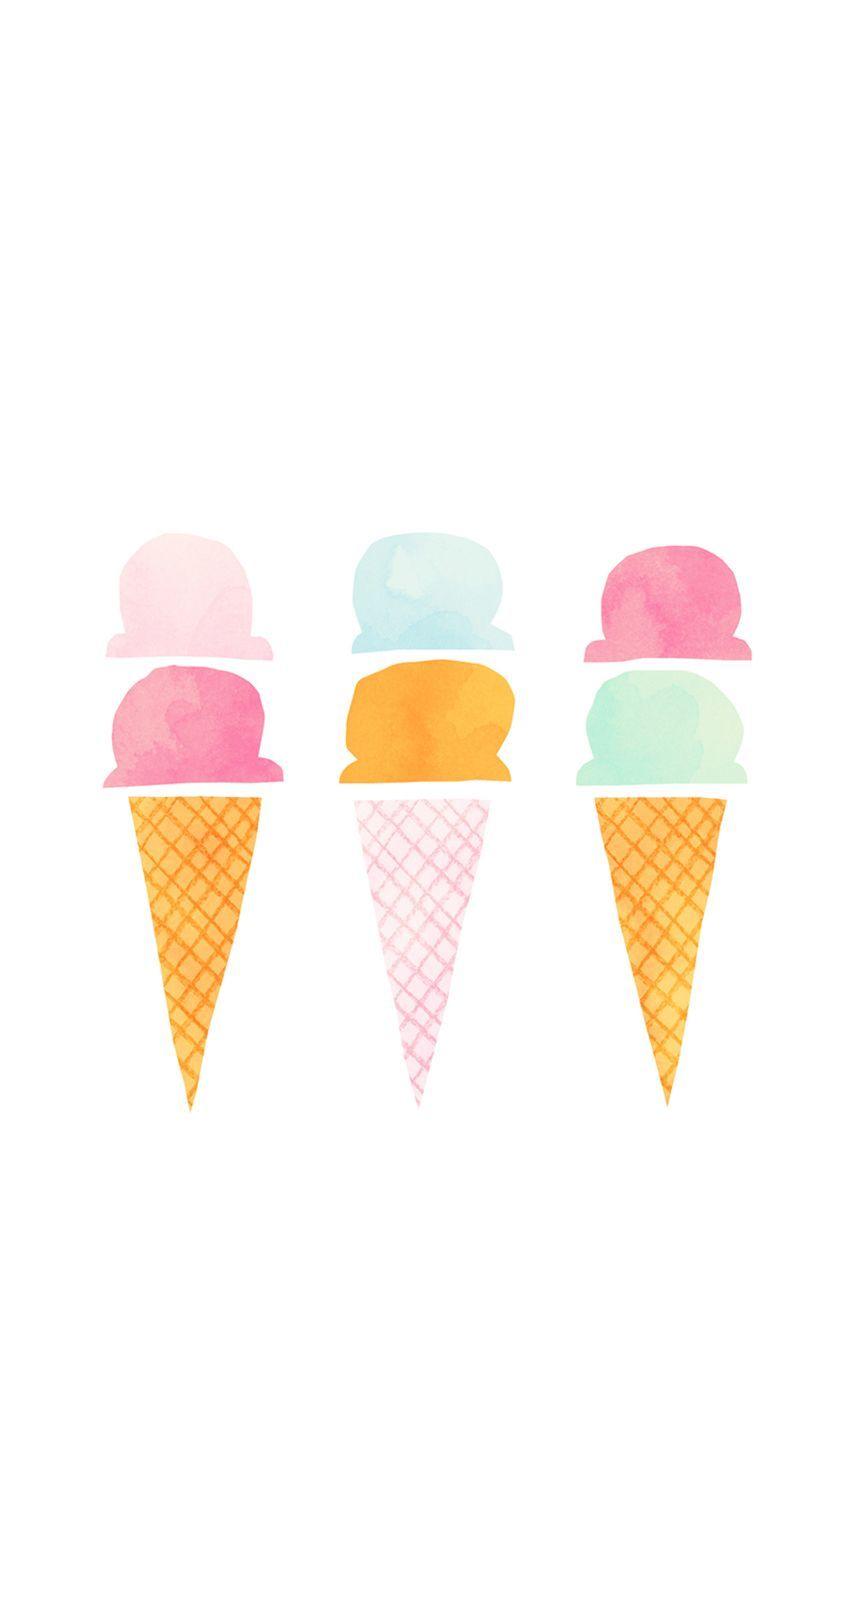 Cute Ice Cream iPhone Wallpapers - Top